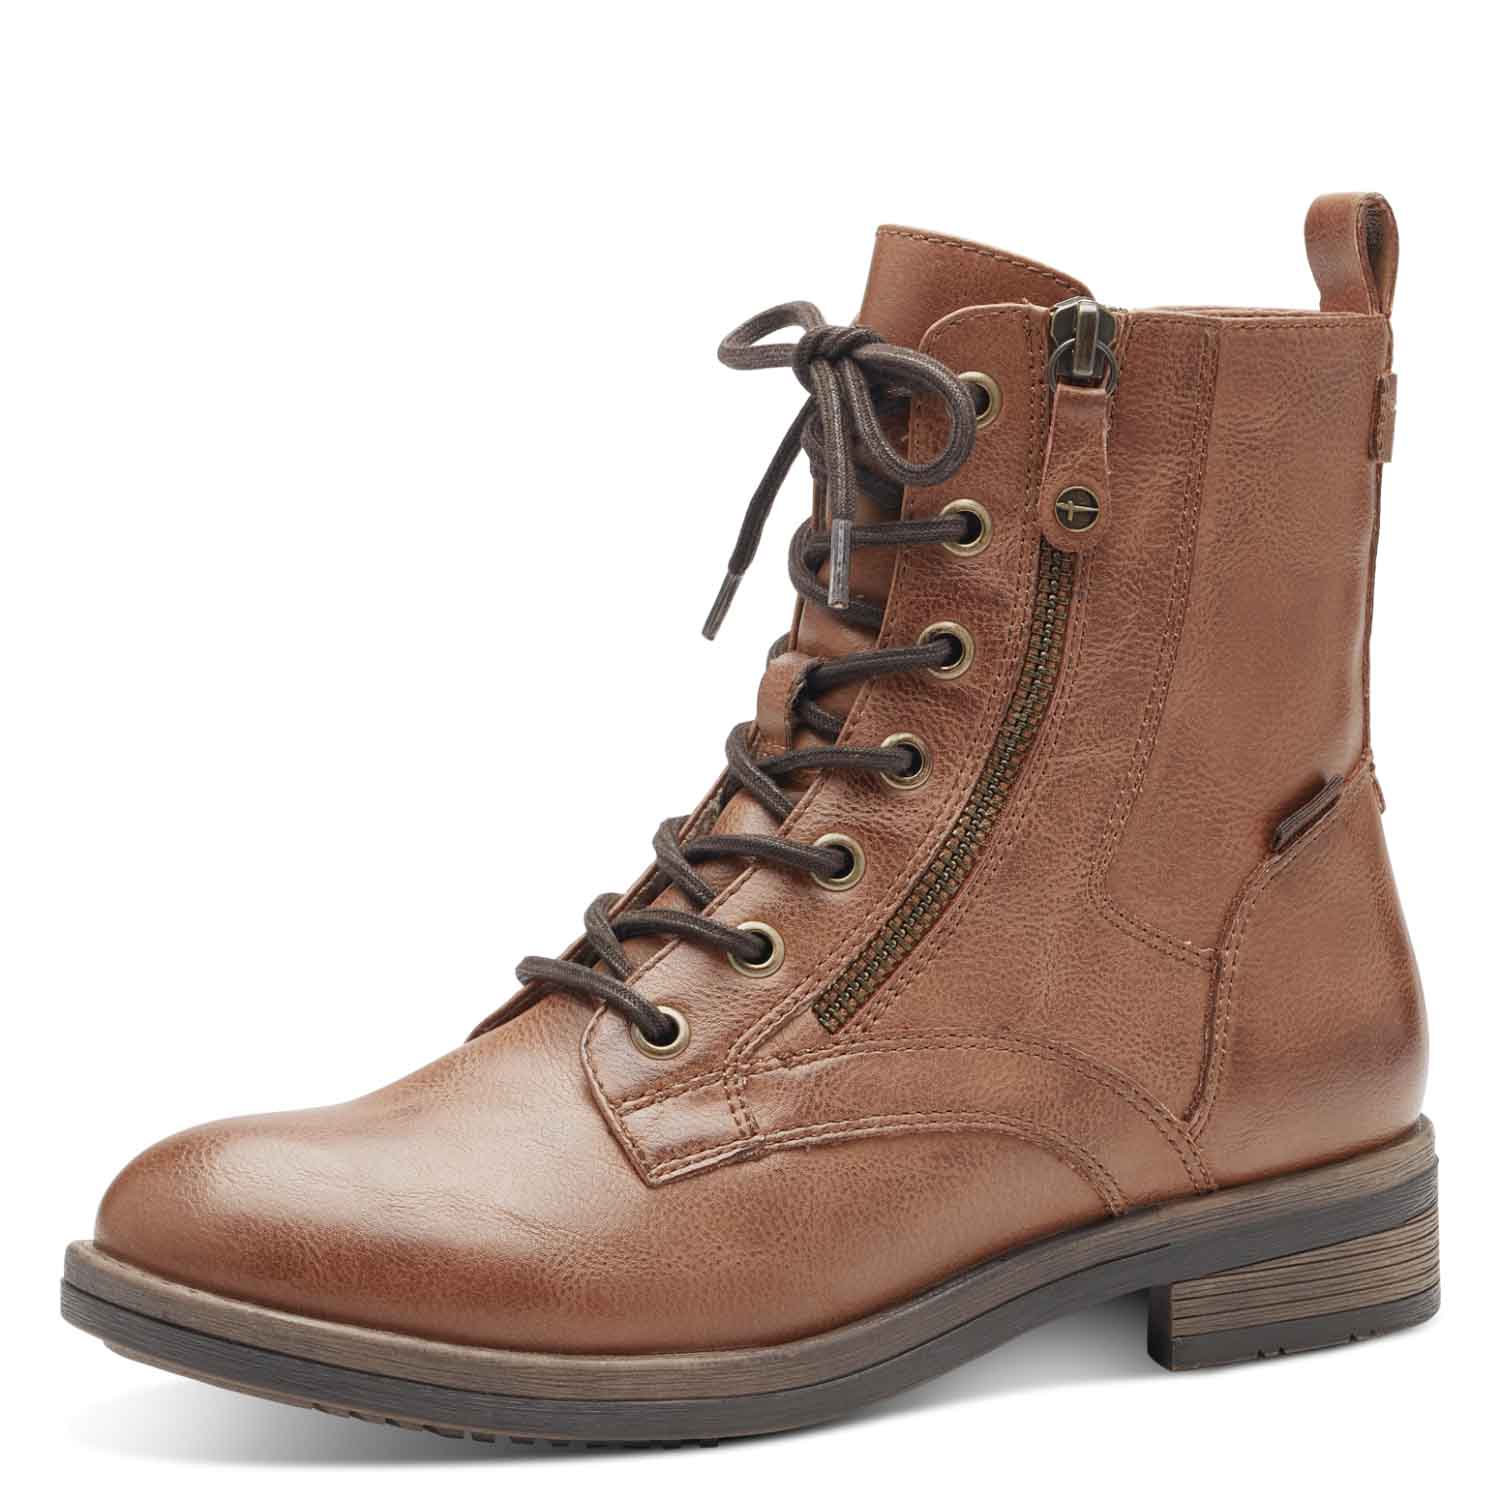 Angled view of the brown lace-up ankle boot